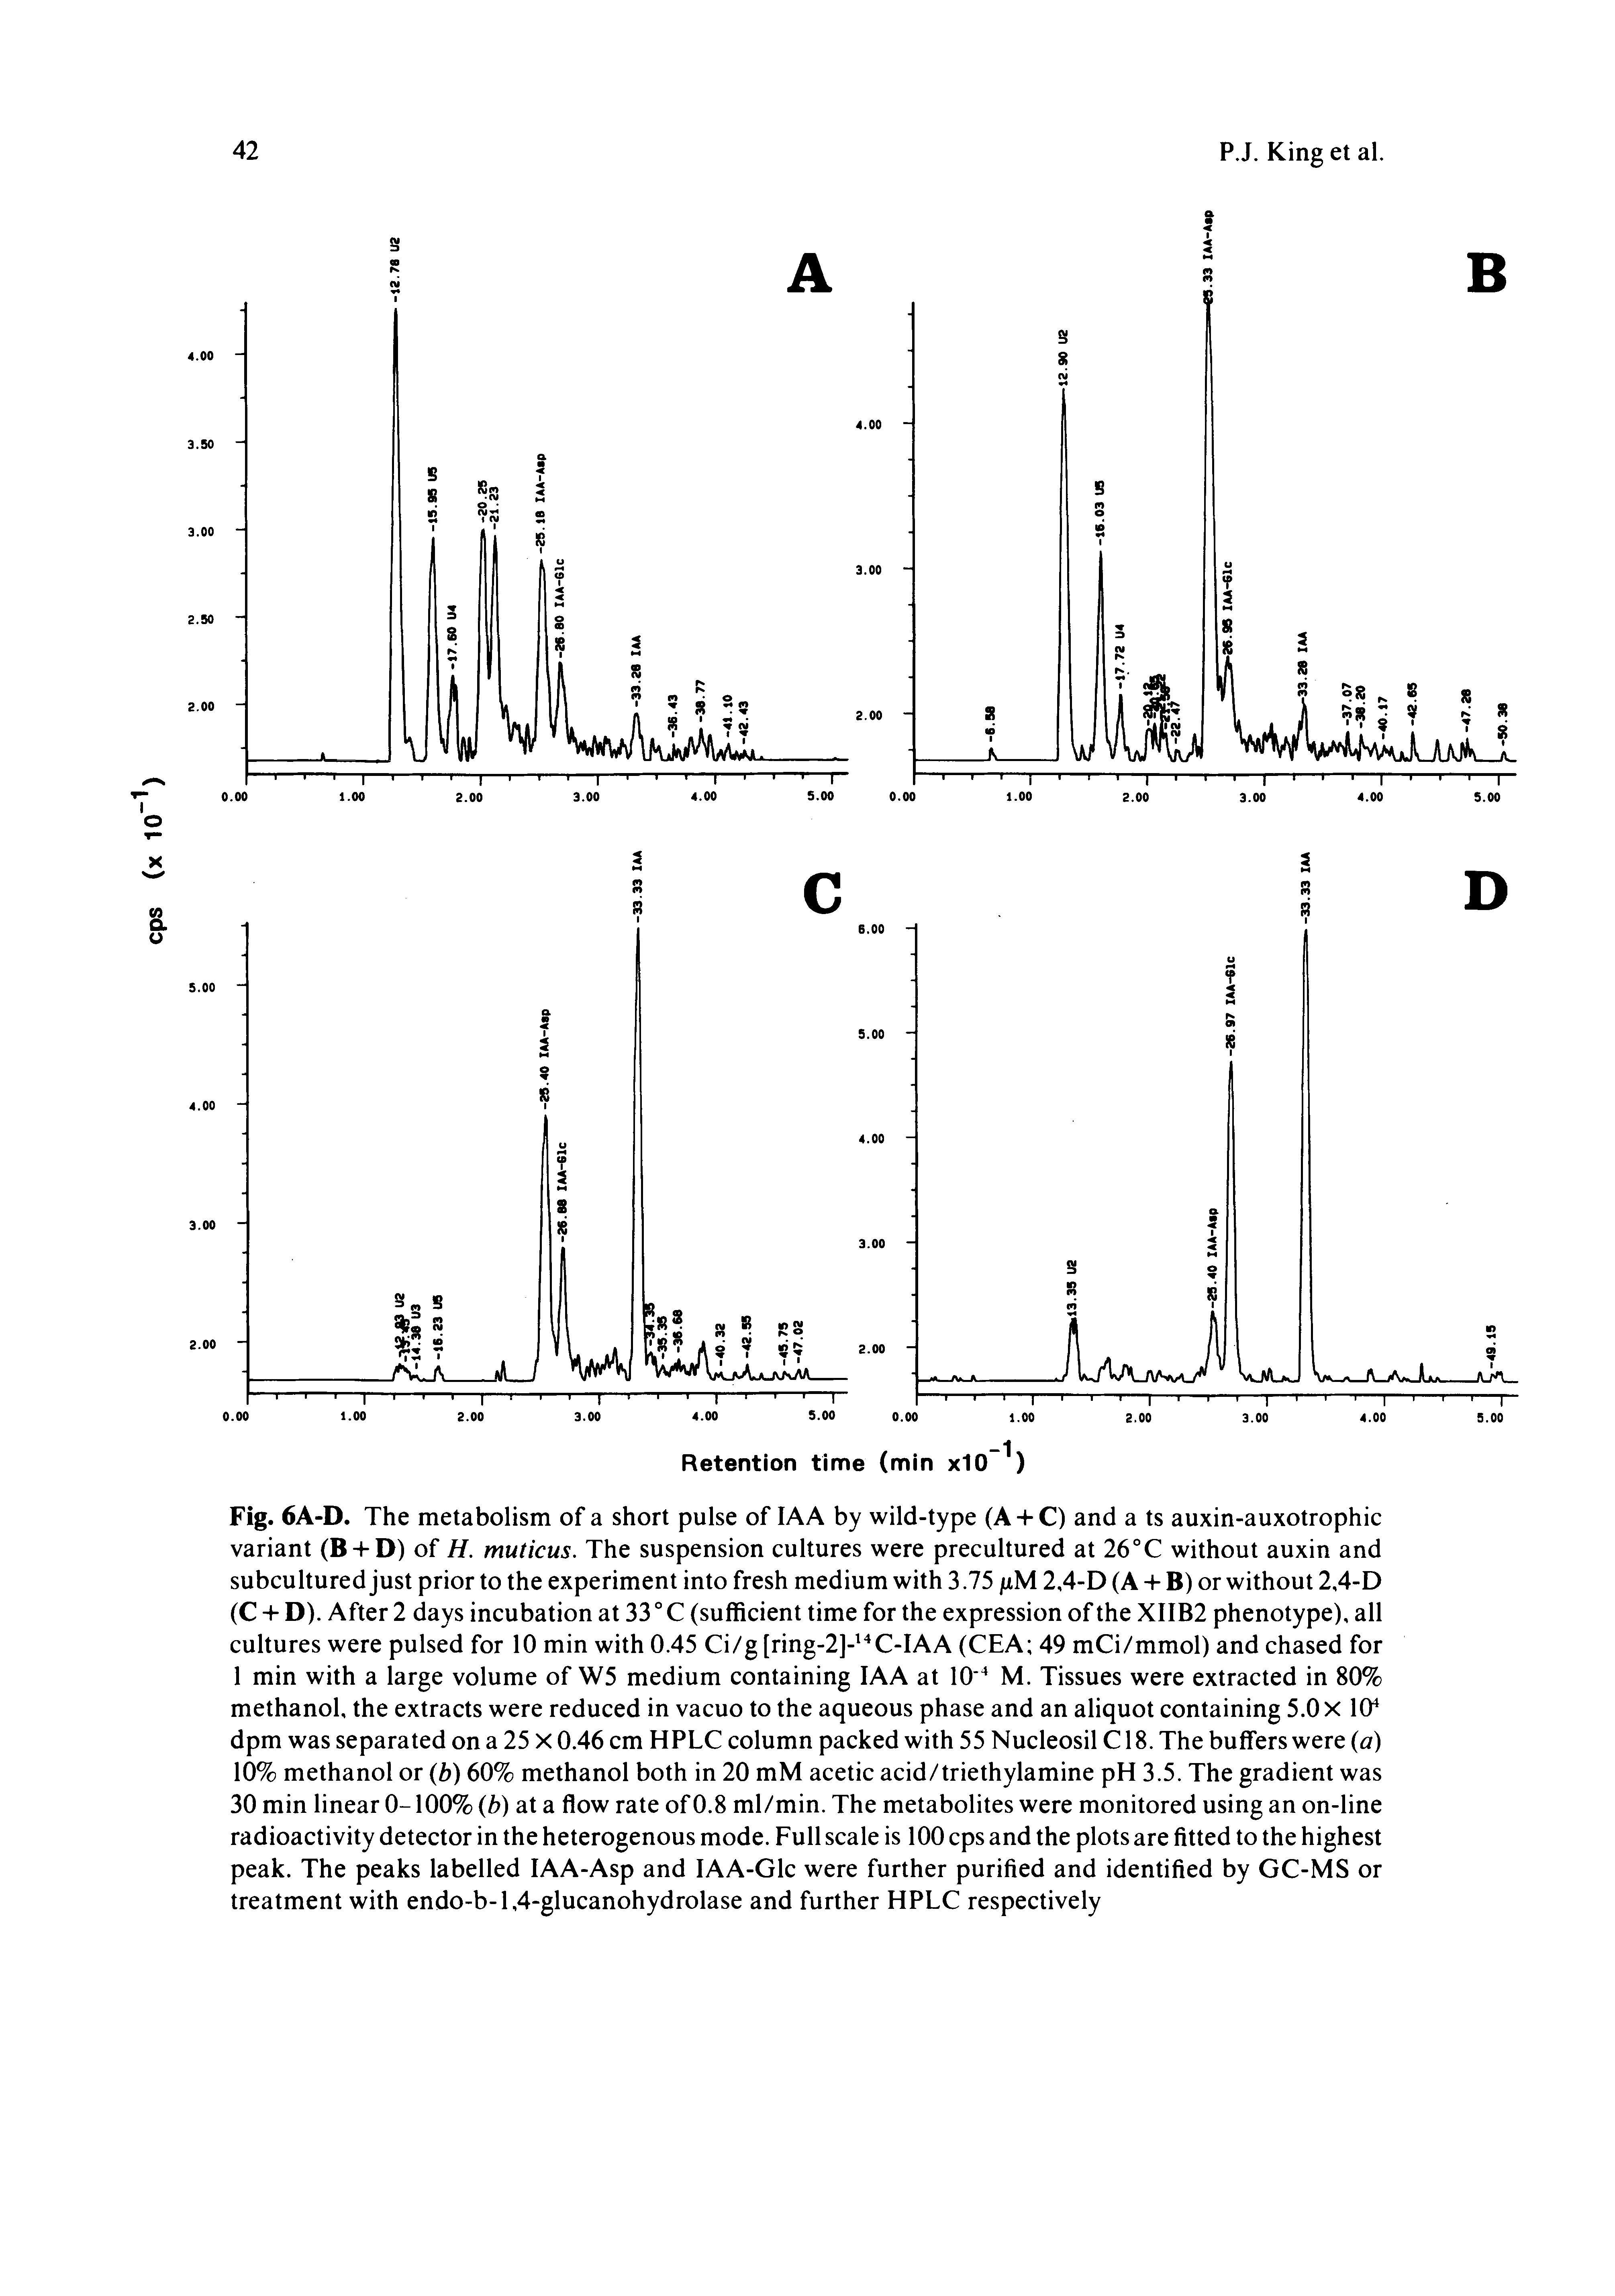 Fig. 6A-D. The metabolism of a short pulse of lAA by wild-type (A + C) and a ts auxin-auxotrophic variant (B + D) of H. muticus. The suspension cultures were precultured at 26 C without auxin and subcultured just prior to the experiment into fresh medium with 3.75 juM 2,4-D (A + B) or without 2,4-D (C + D). After 2 days incubation at 33 ° C (sufficient time for the expression of the XIIB2 phenotype), all cultures were pulsed for 10 min with 0.45 Ci/g [ring-2]- C-IAA (CEA 49 mCi/mmol) and chased for 1 min with a large volume of W5 medium containing lAA at 10 M. Tissues were extracted in 80% methanol, the extracts were reduced in vacuo to the aqueous phase and an aliquot containing 5.0 X 10 dpm was separated on a 25 X 0.46 cm HPLC column packed with 55 Nucleosil C18. The buffers were a) 10% methanol or b) 60% methanol both in 20 mM acetic acid/triethylamine pH 3.5. The gradient was 30 min linear 0-100% (b) at a flow rate of 0.8 ml/min. The metabolites were monitored using an on-line radioactivity detector in the heterogenous mode. Full scale is 100 cps and the plots are fitted to the highest peak. The peaks labelled lAA-Asp and lAA-Glc were further purified and identified by GC-MS or treatment with endo-b-l,4-glucanohydrolase and further HPLC respectively...